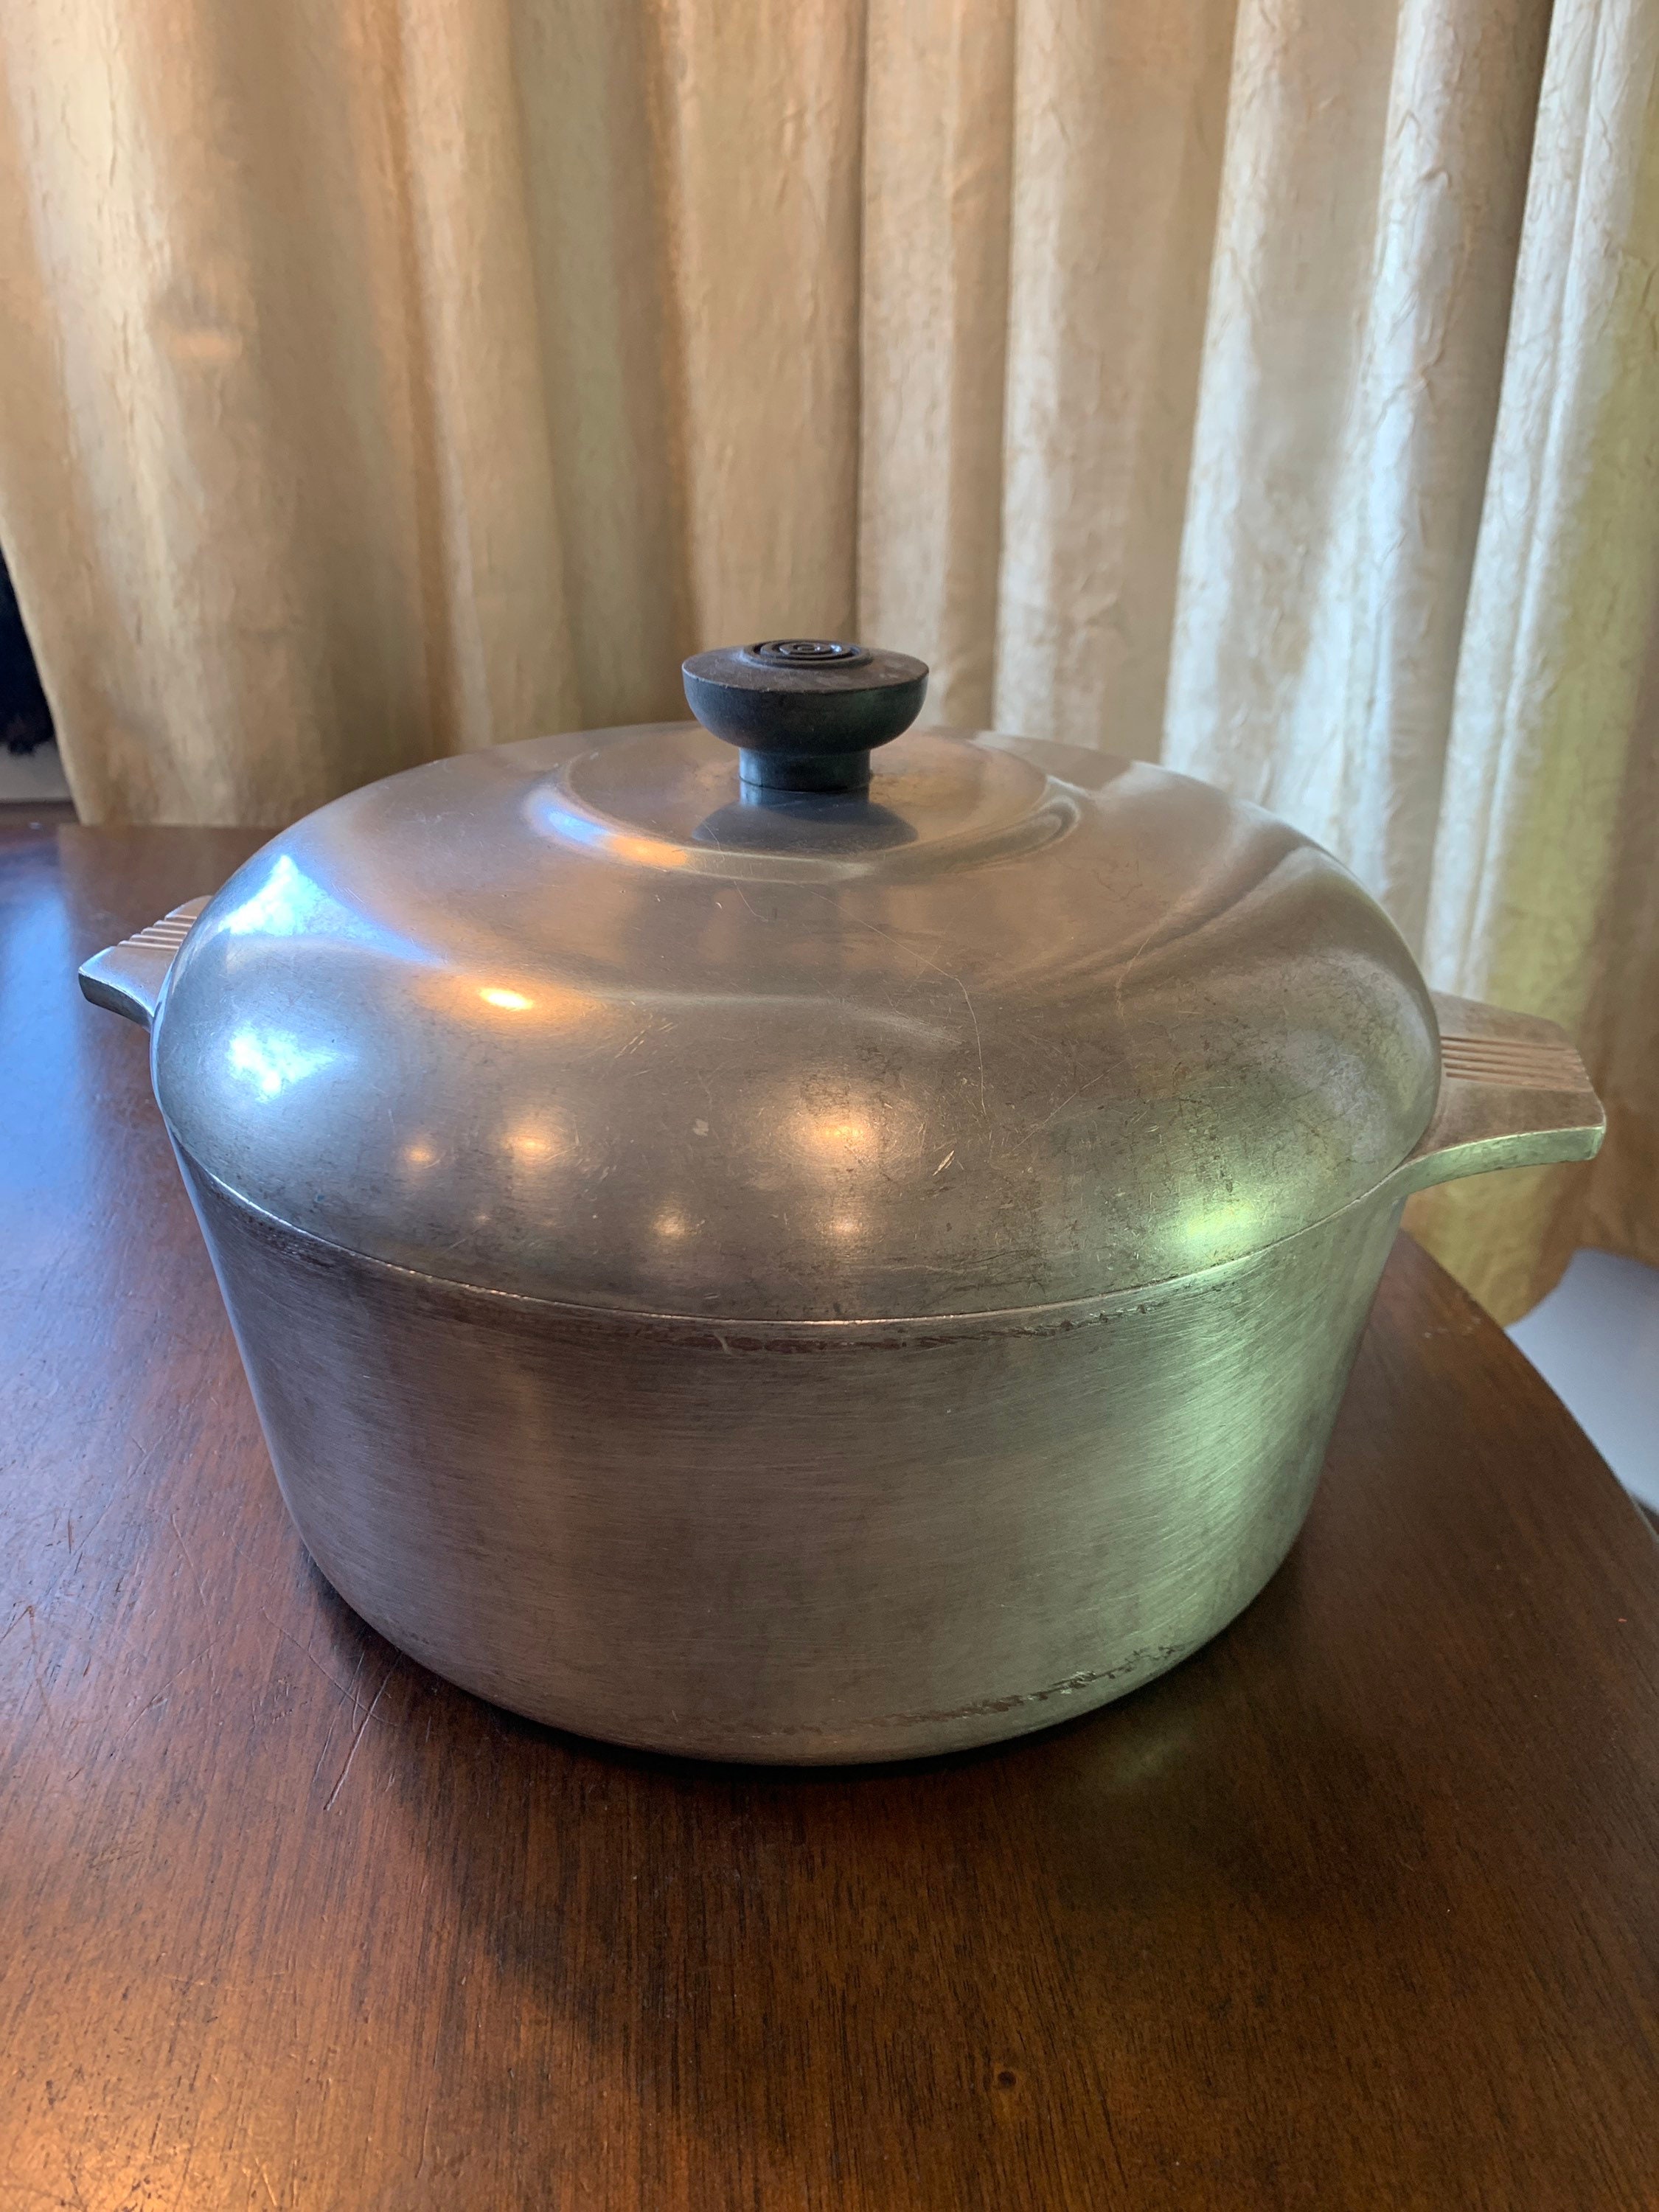 Vintage 13 qt. Magnalite roaster in great condition measures 18 5/8 long x  11 9/16 wide with lid that fits perfectly, 9 tall with handle